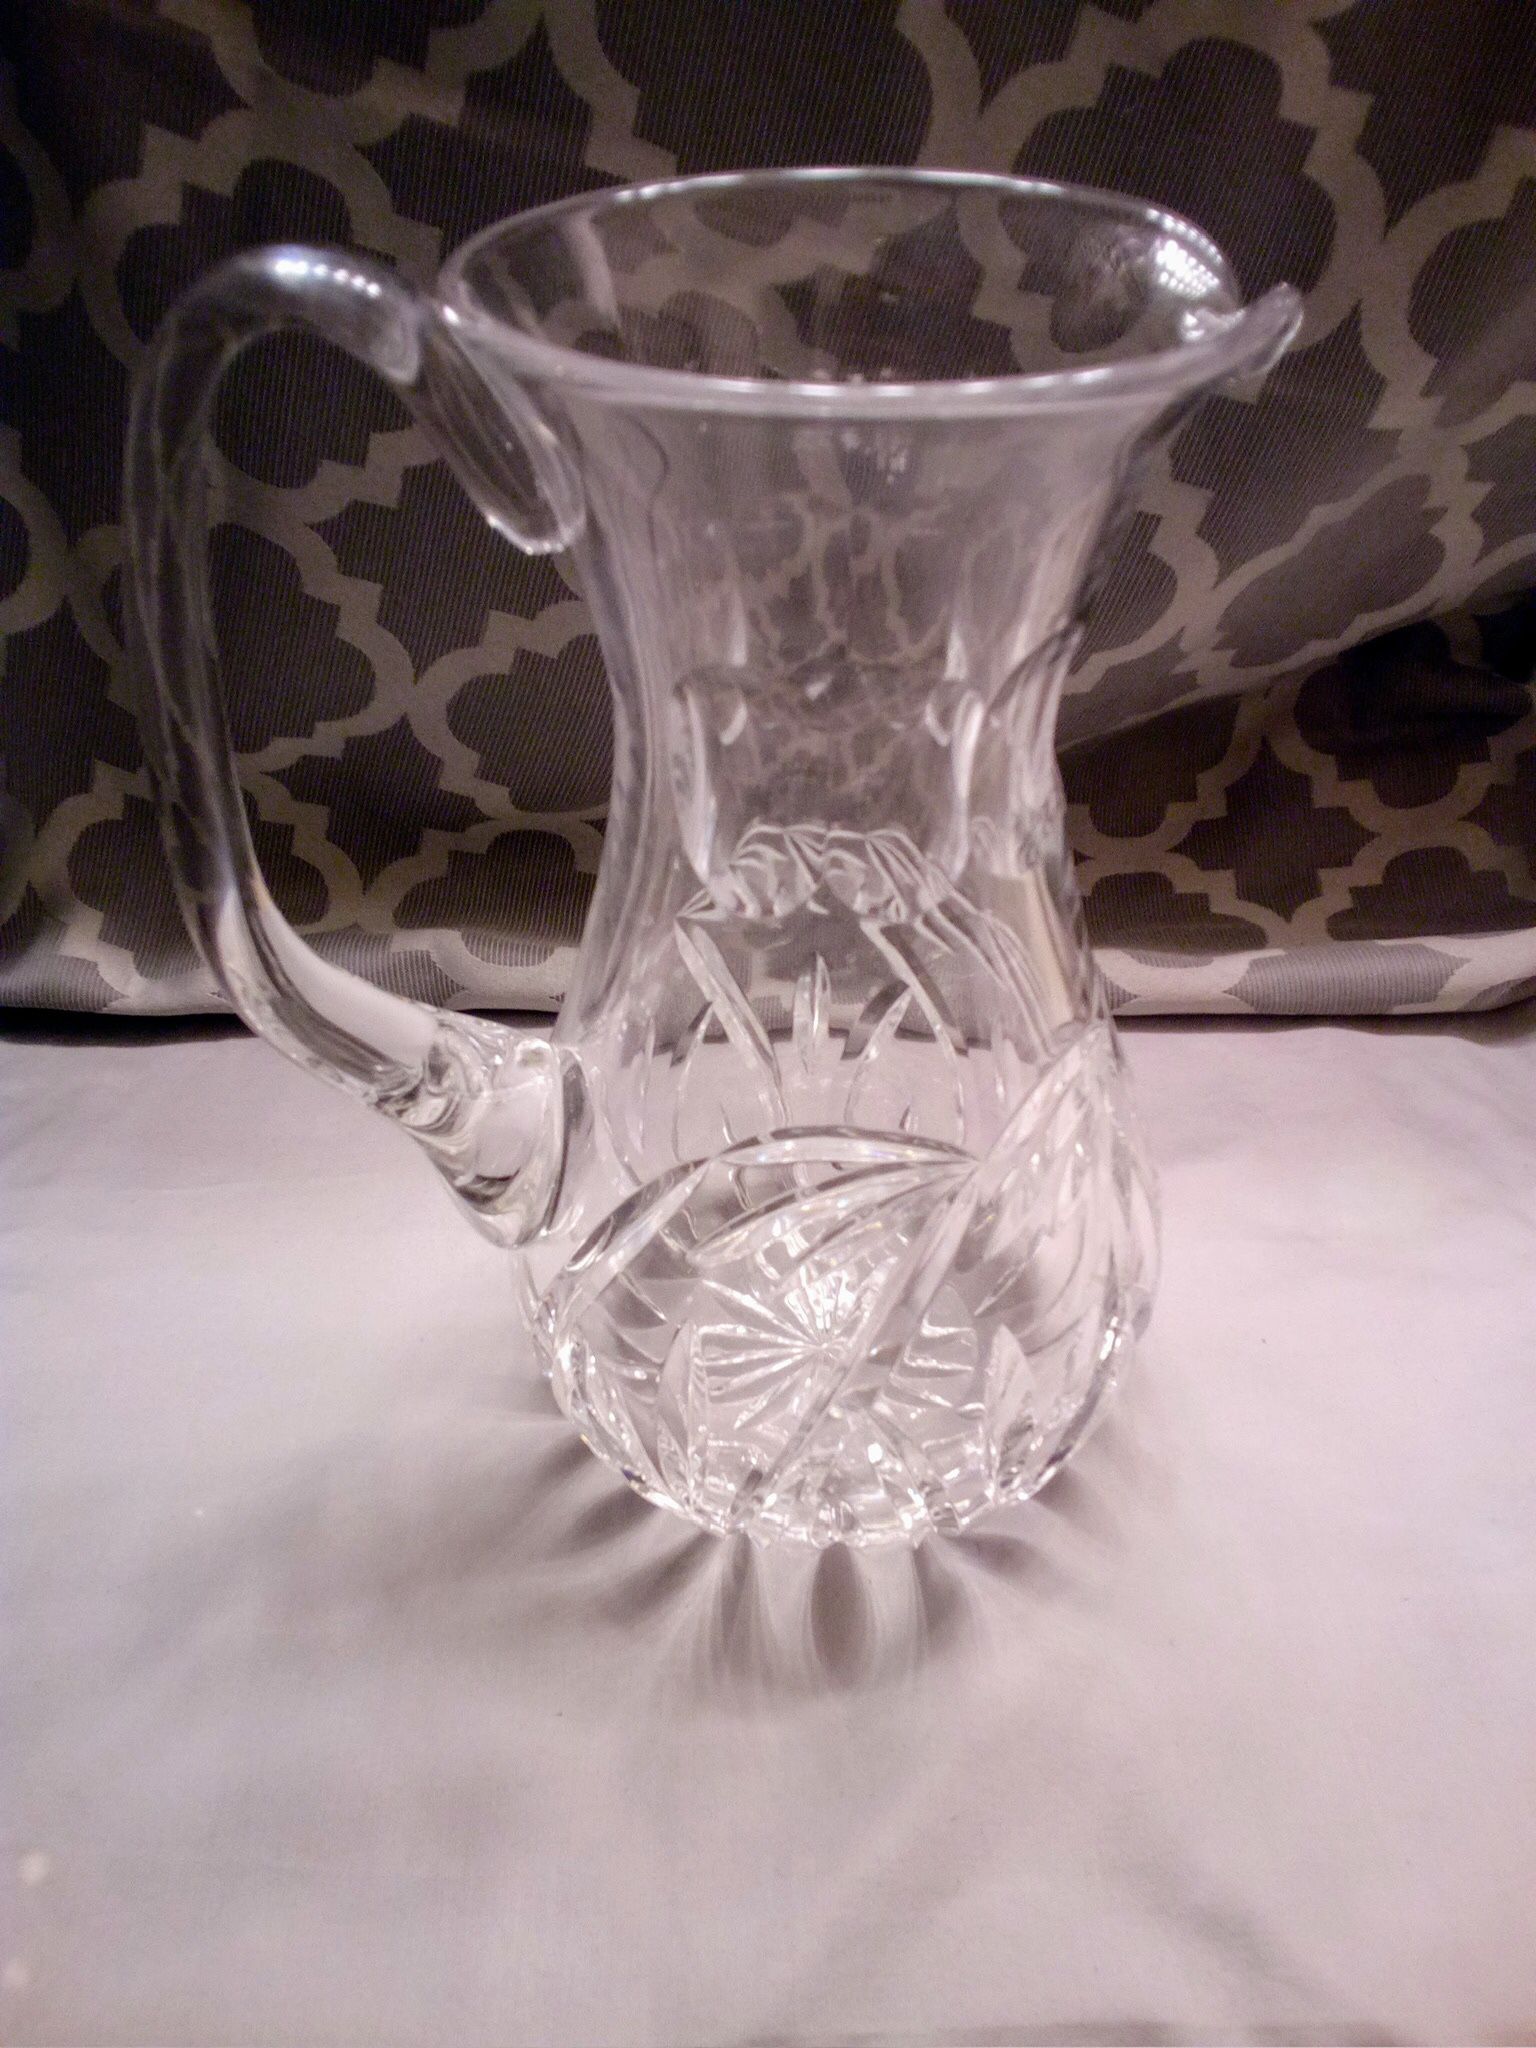 Stunning Crystal Waterford Pitcher, Excellent Condition - 44 oz.